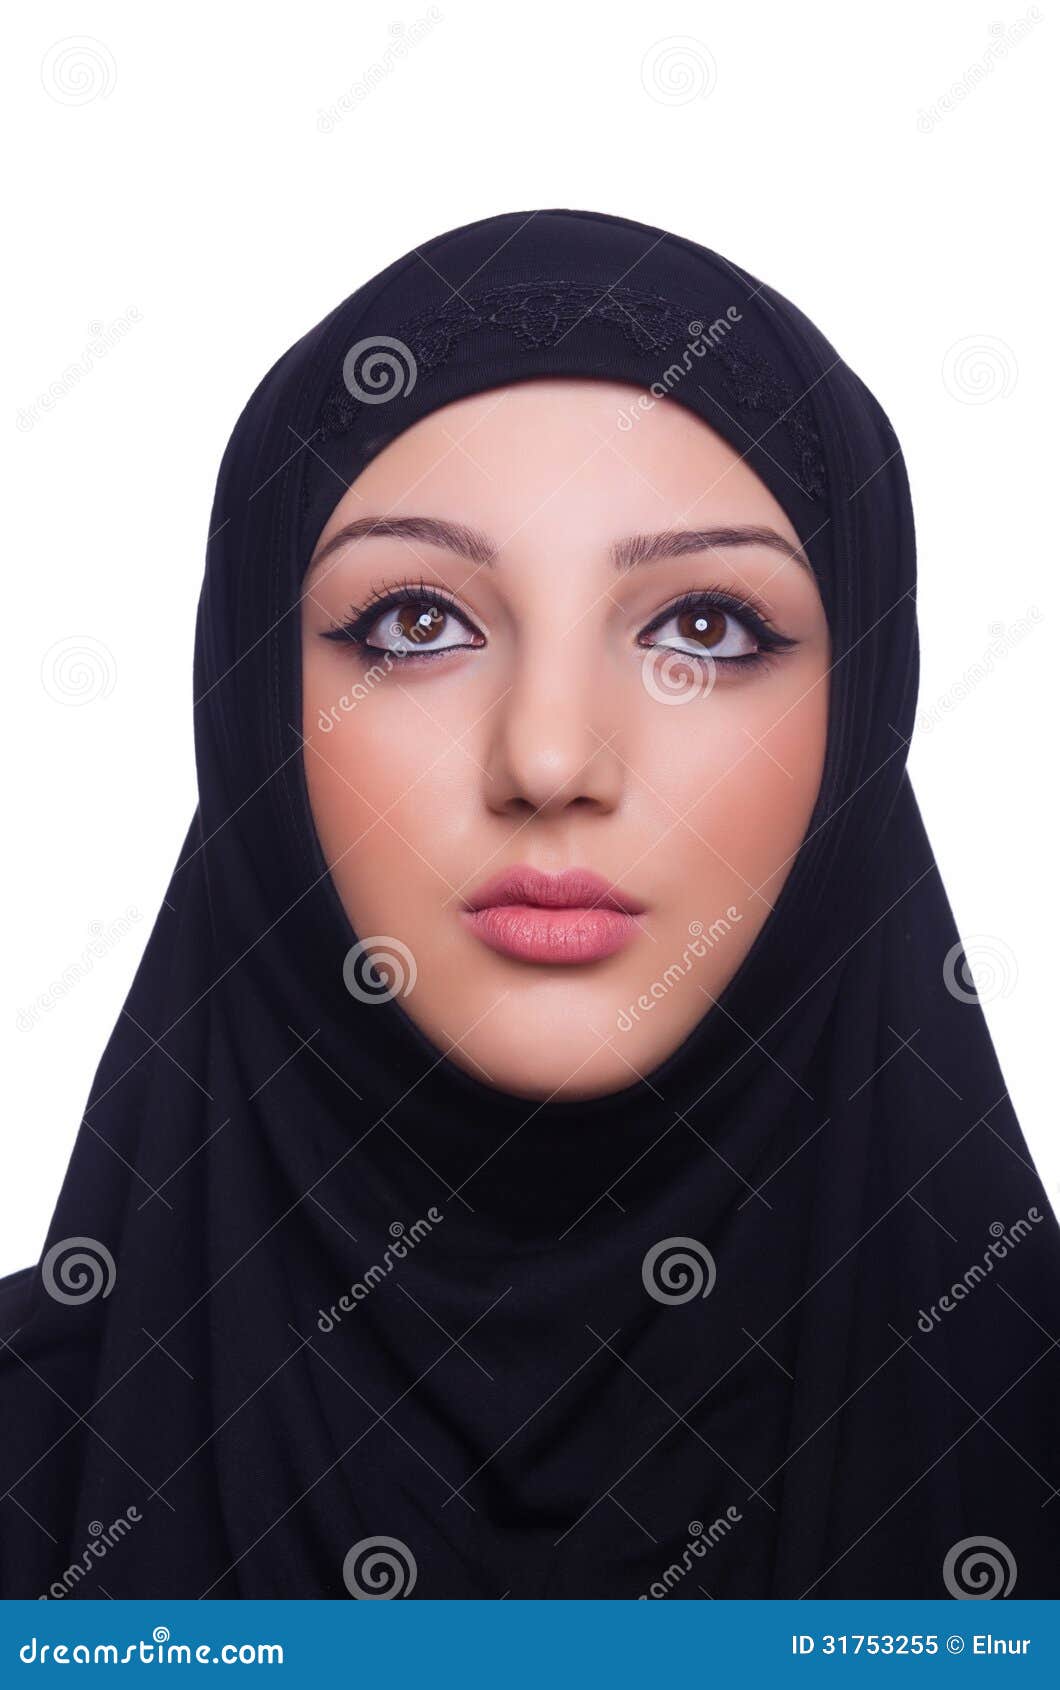 6 Essays about Hijab